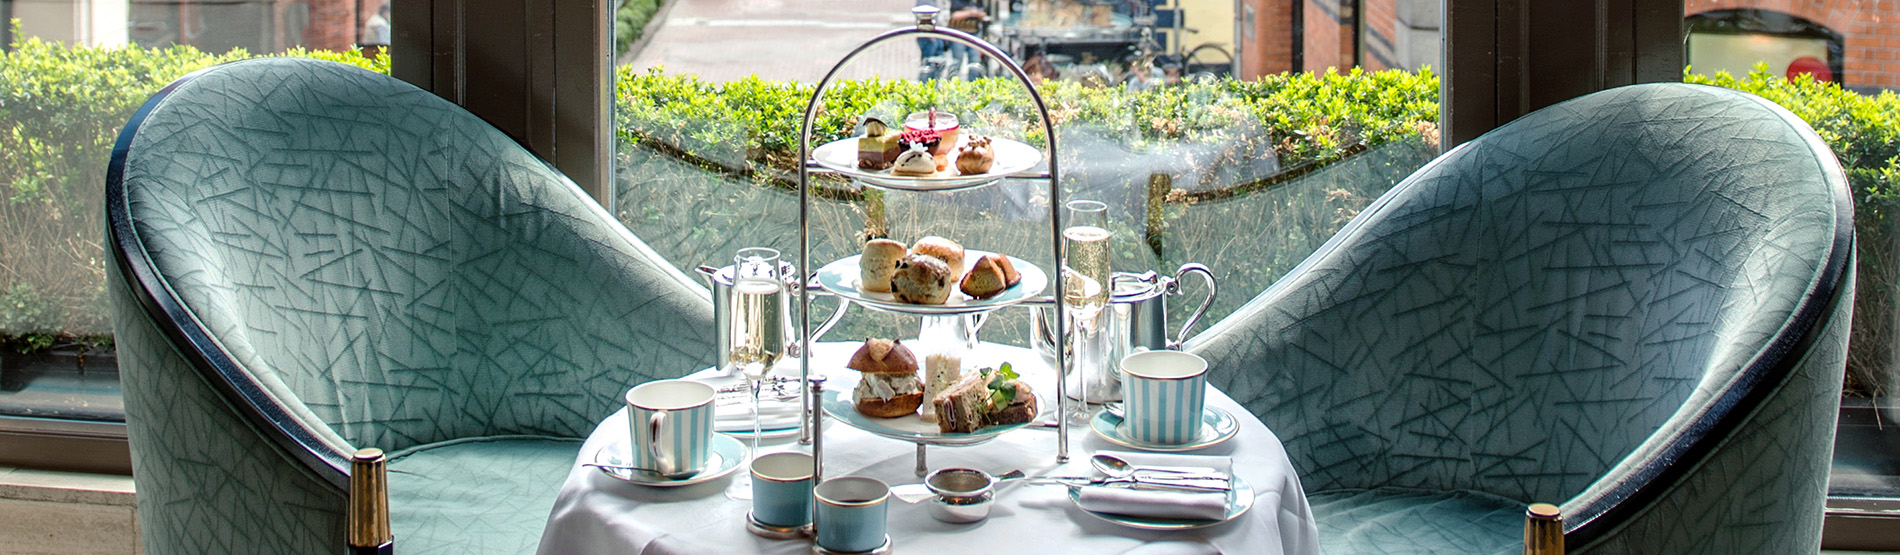 Afternoon Tea on The Gallery at The Westbury